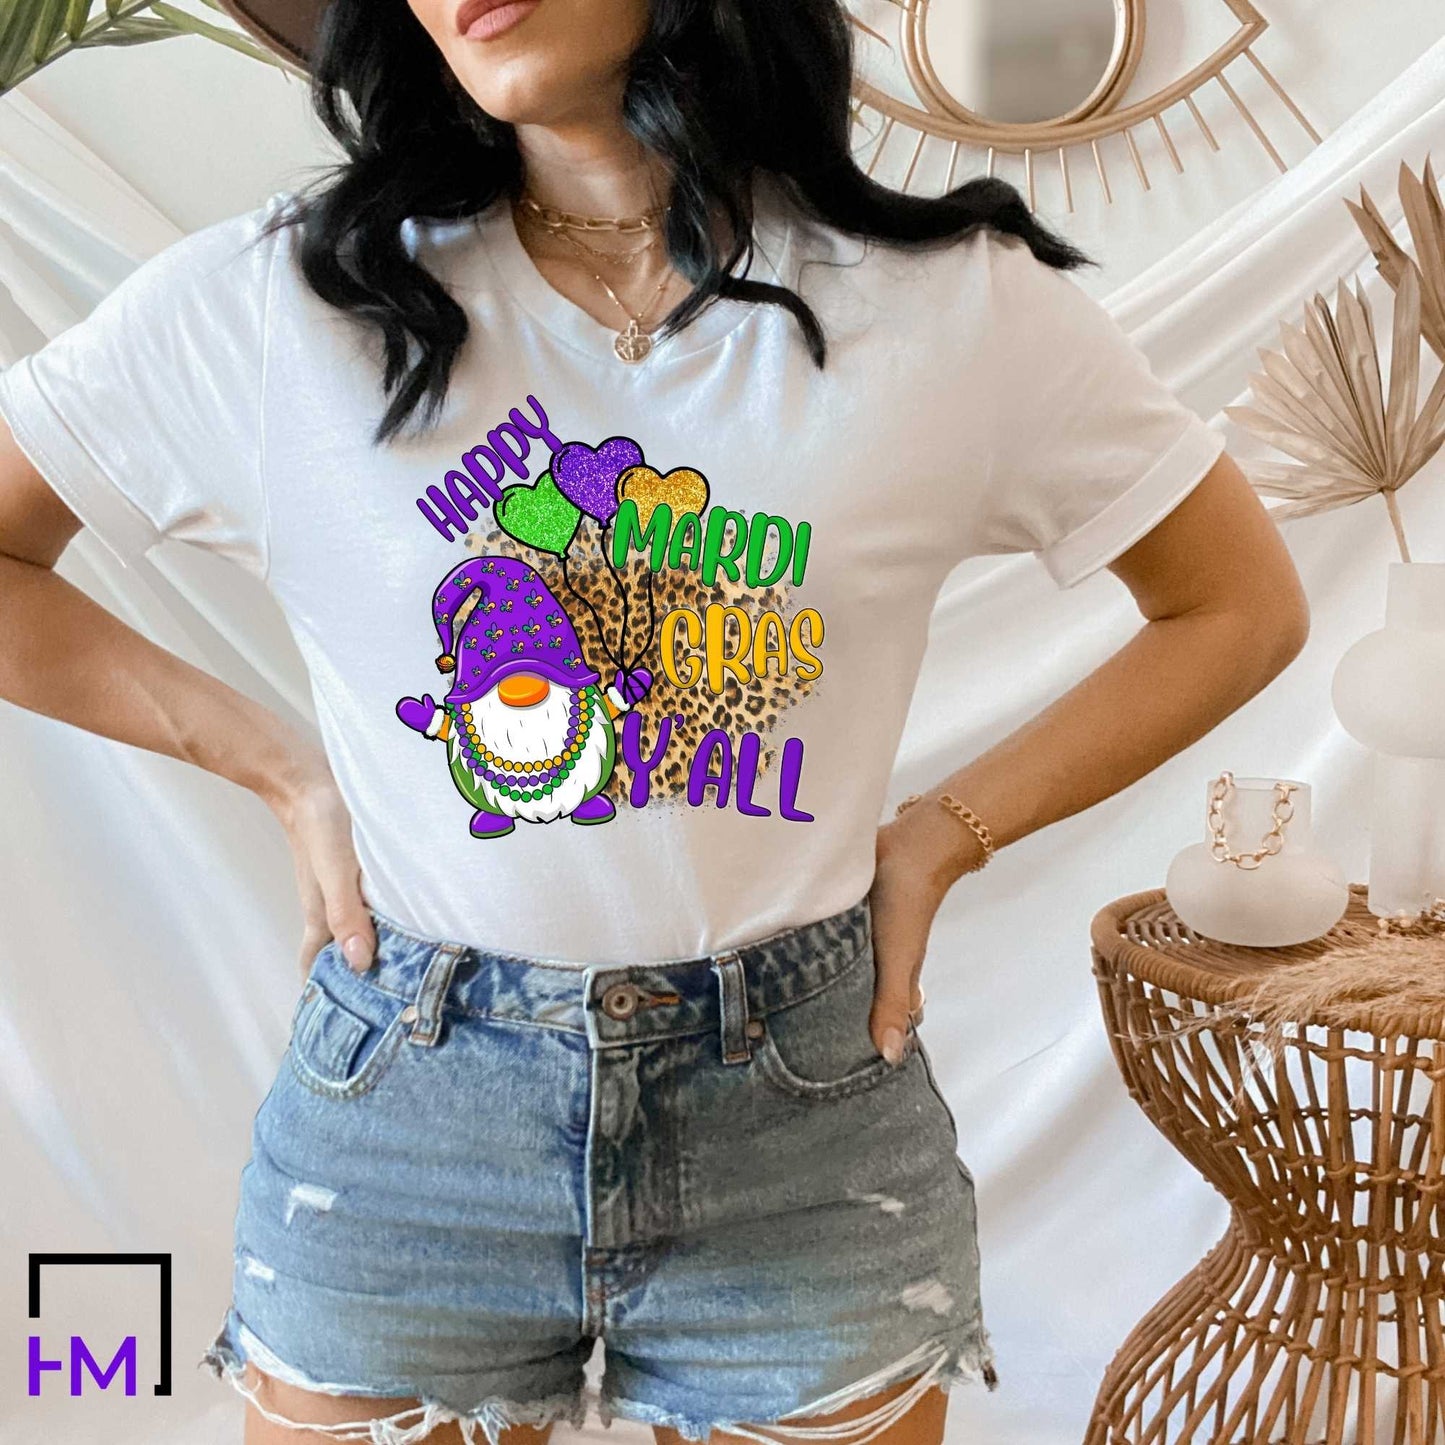 Gnome Mardi Gras Shirt or Tank Top for Women and Men, Plus Sizes Available Up to 5XL